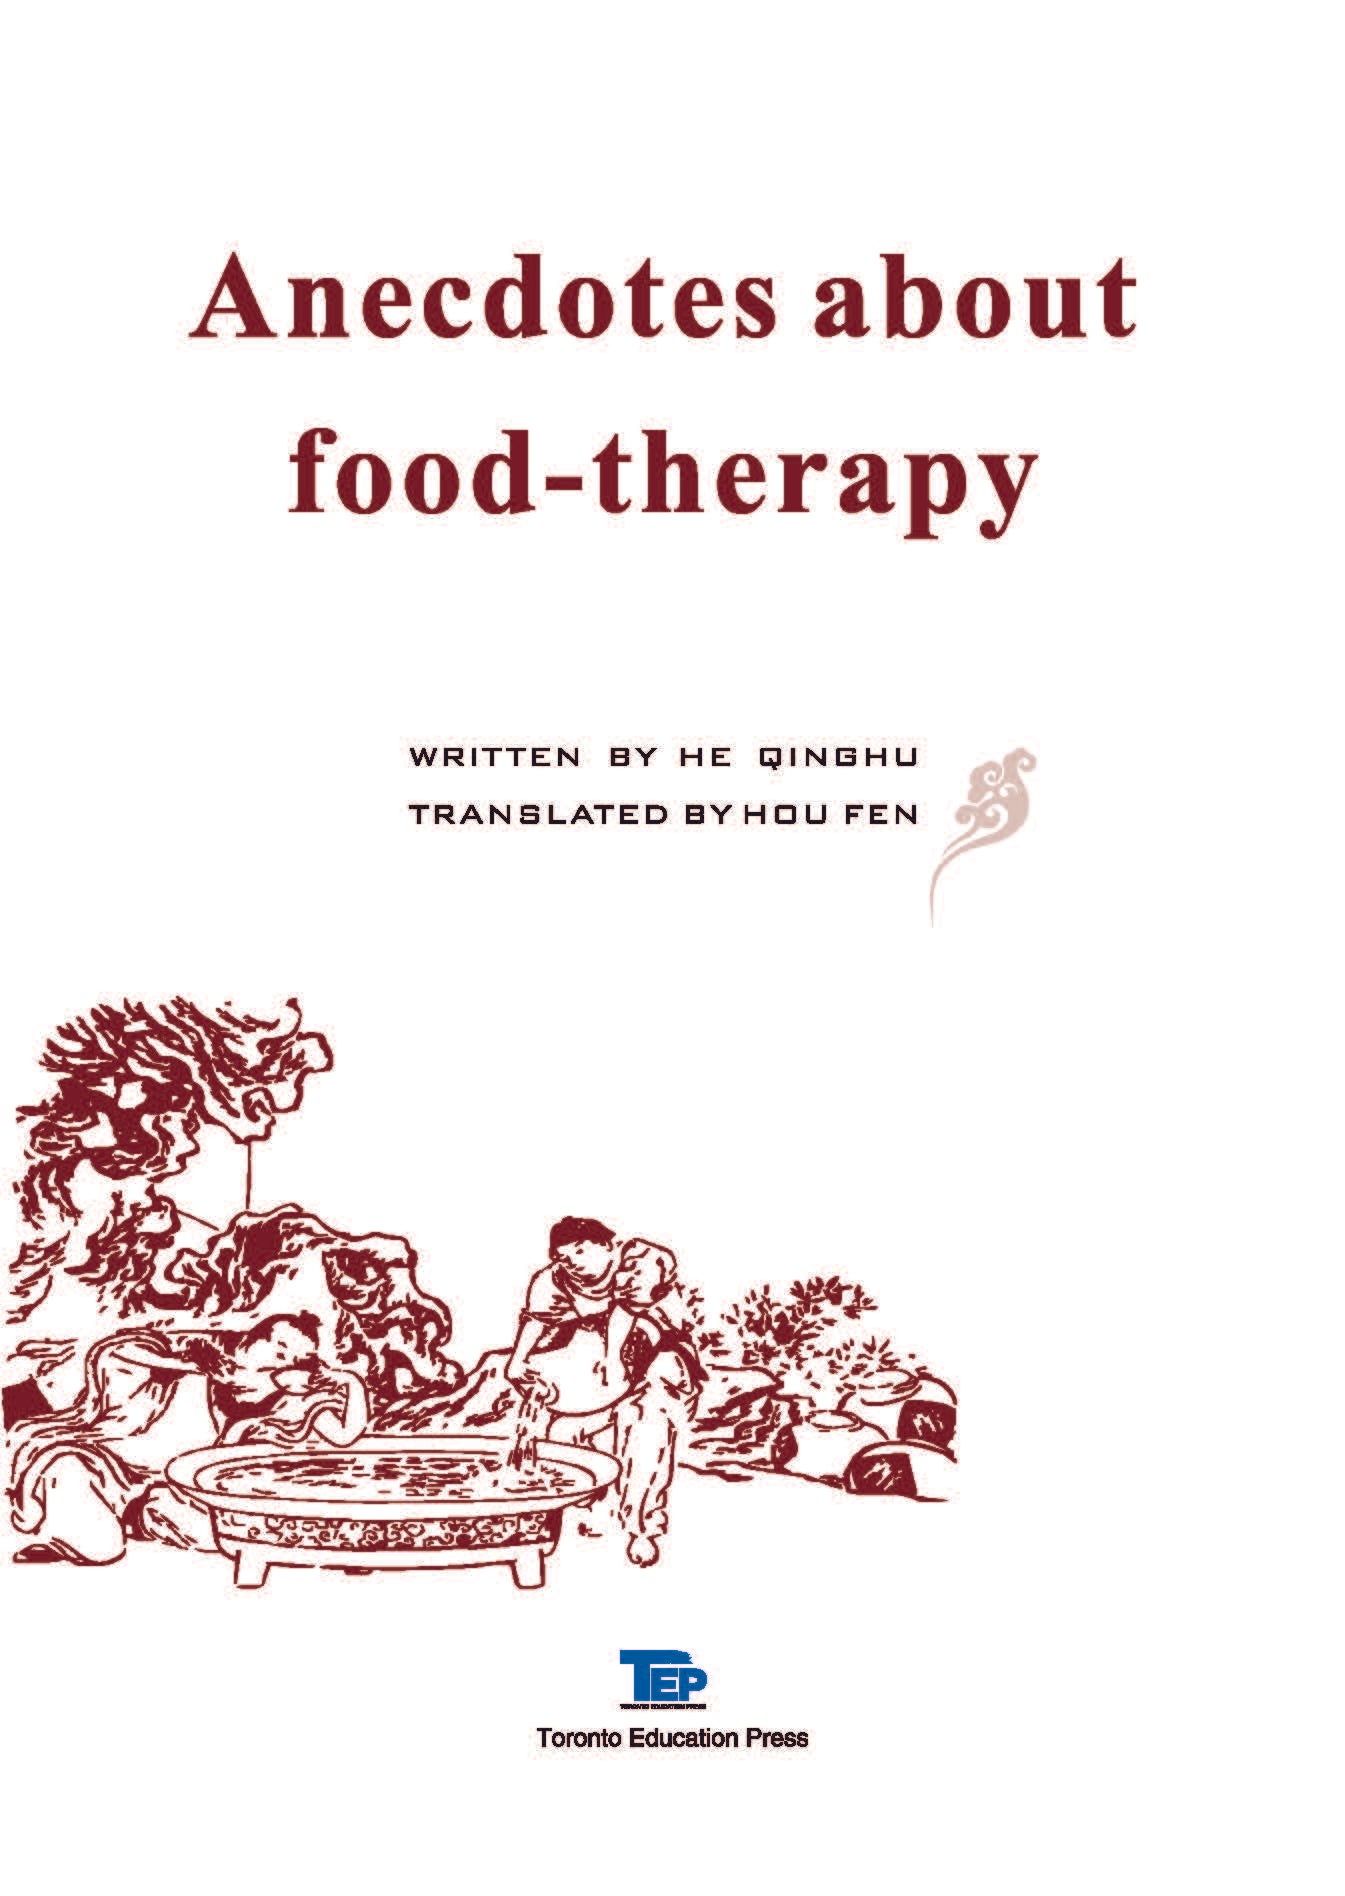 Anecdotes About Food-Therapy